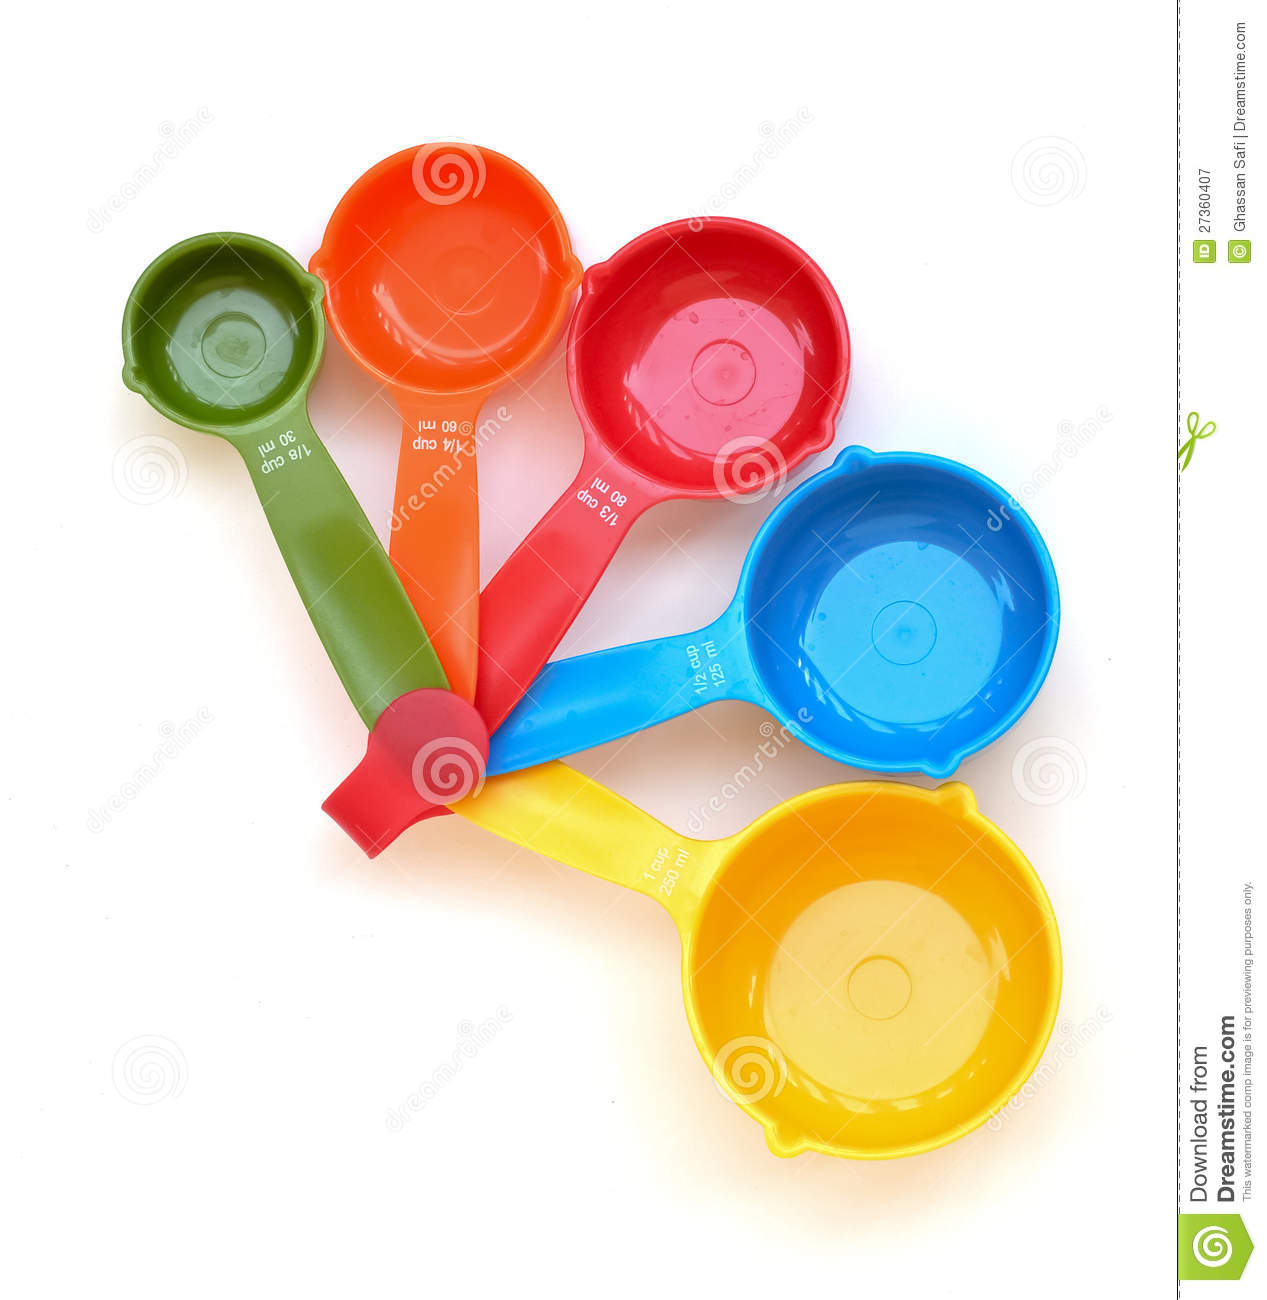 Dry Measuring Cup Clipart Colored Measuring Cups 27360407 Jpg